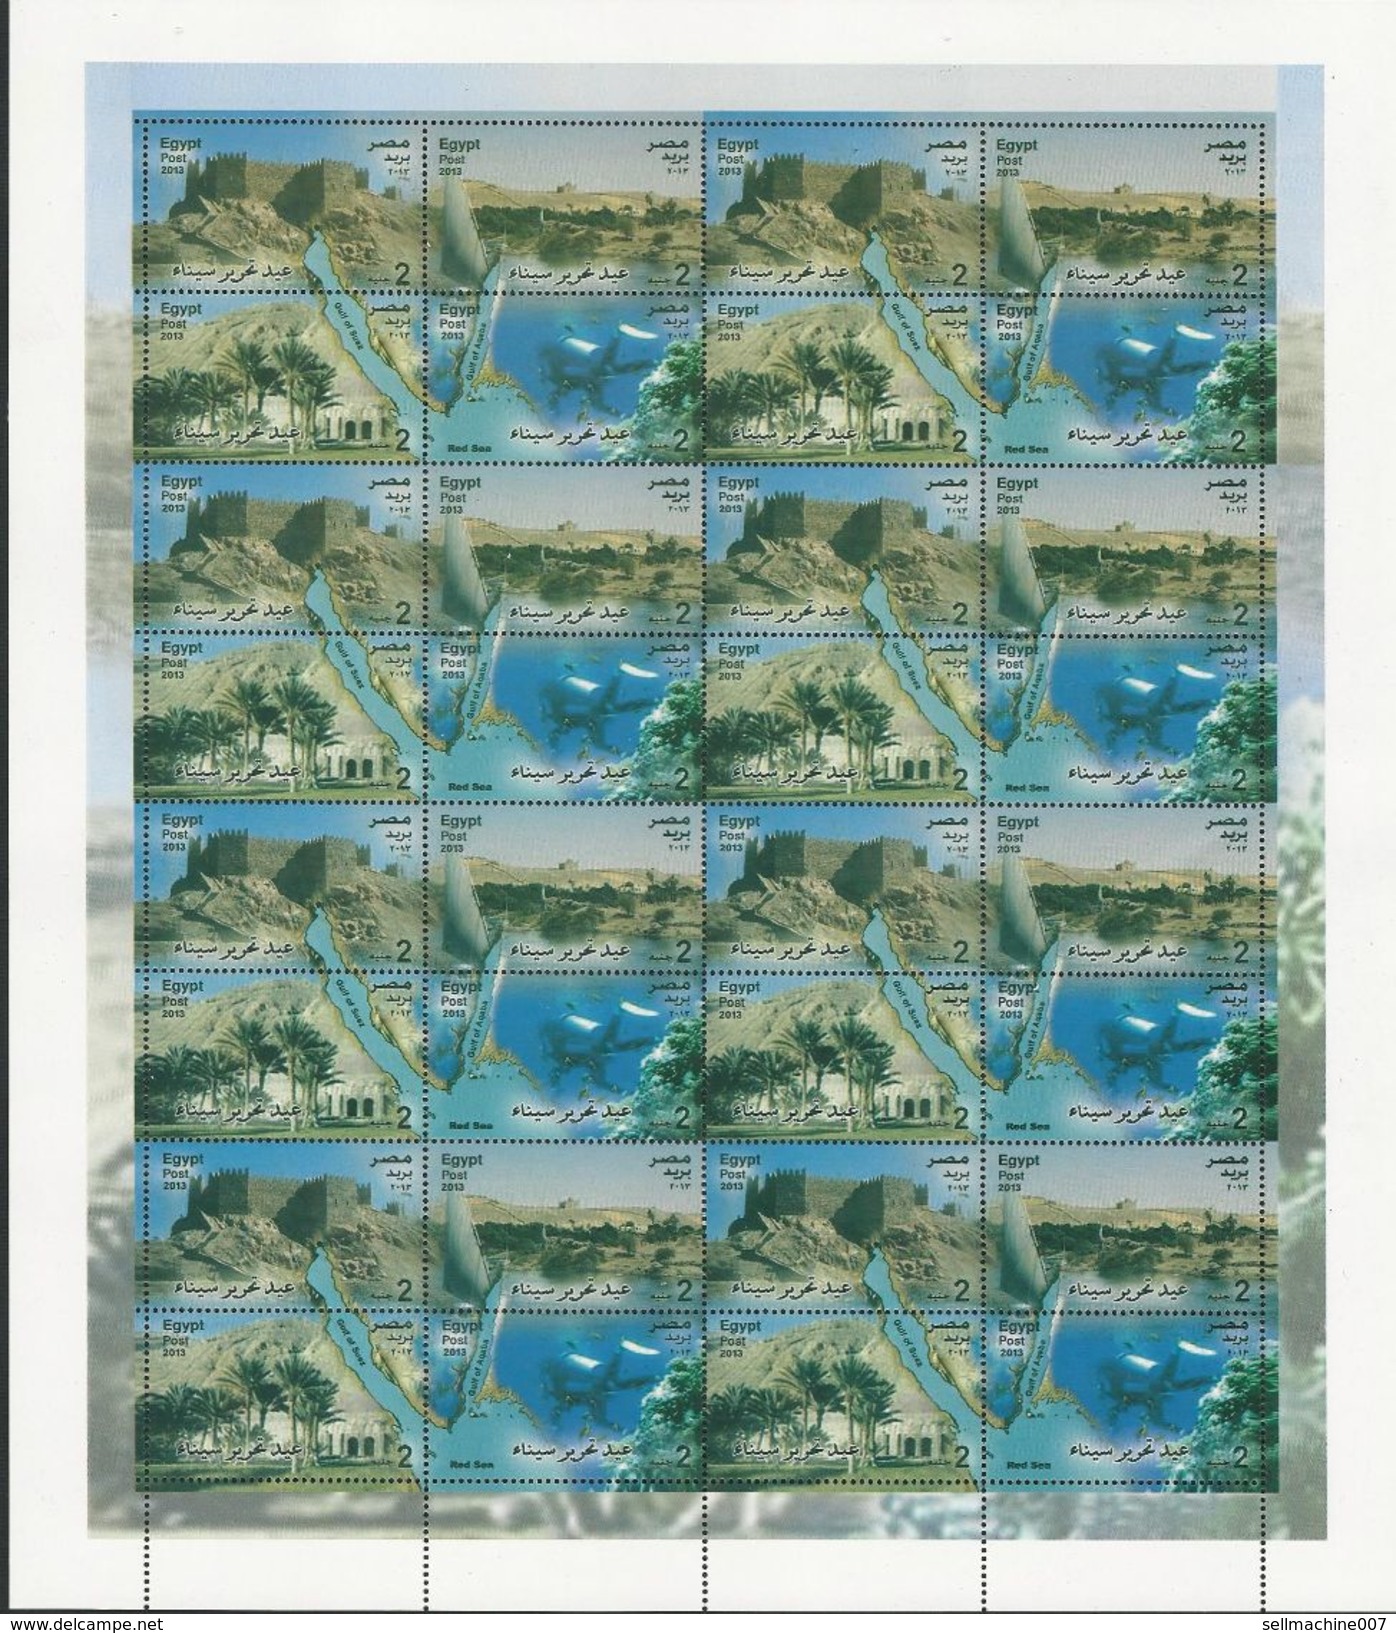 EGYPT 2013 Full Sheet Sinai Liberation Day 32 Stamps 8 Sets X 4 Stamp MNH X 2 POUND - Nile Monuments Divers Palm Trees - Neufs